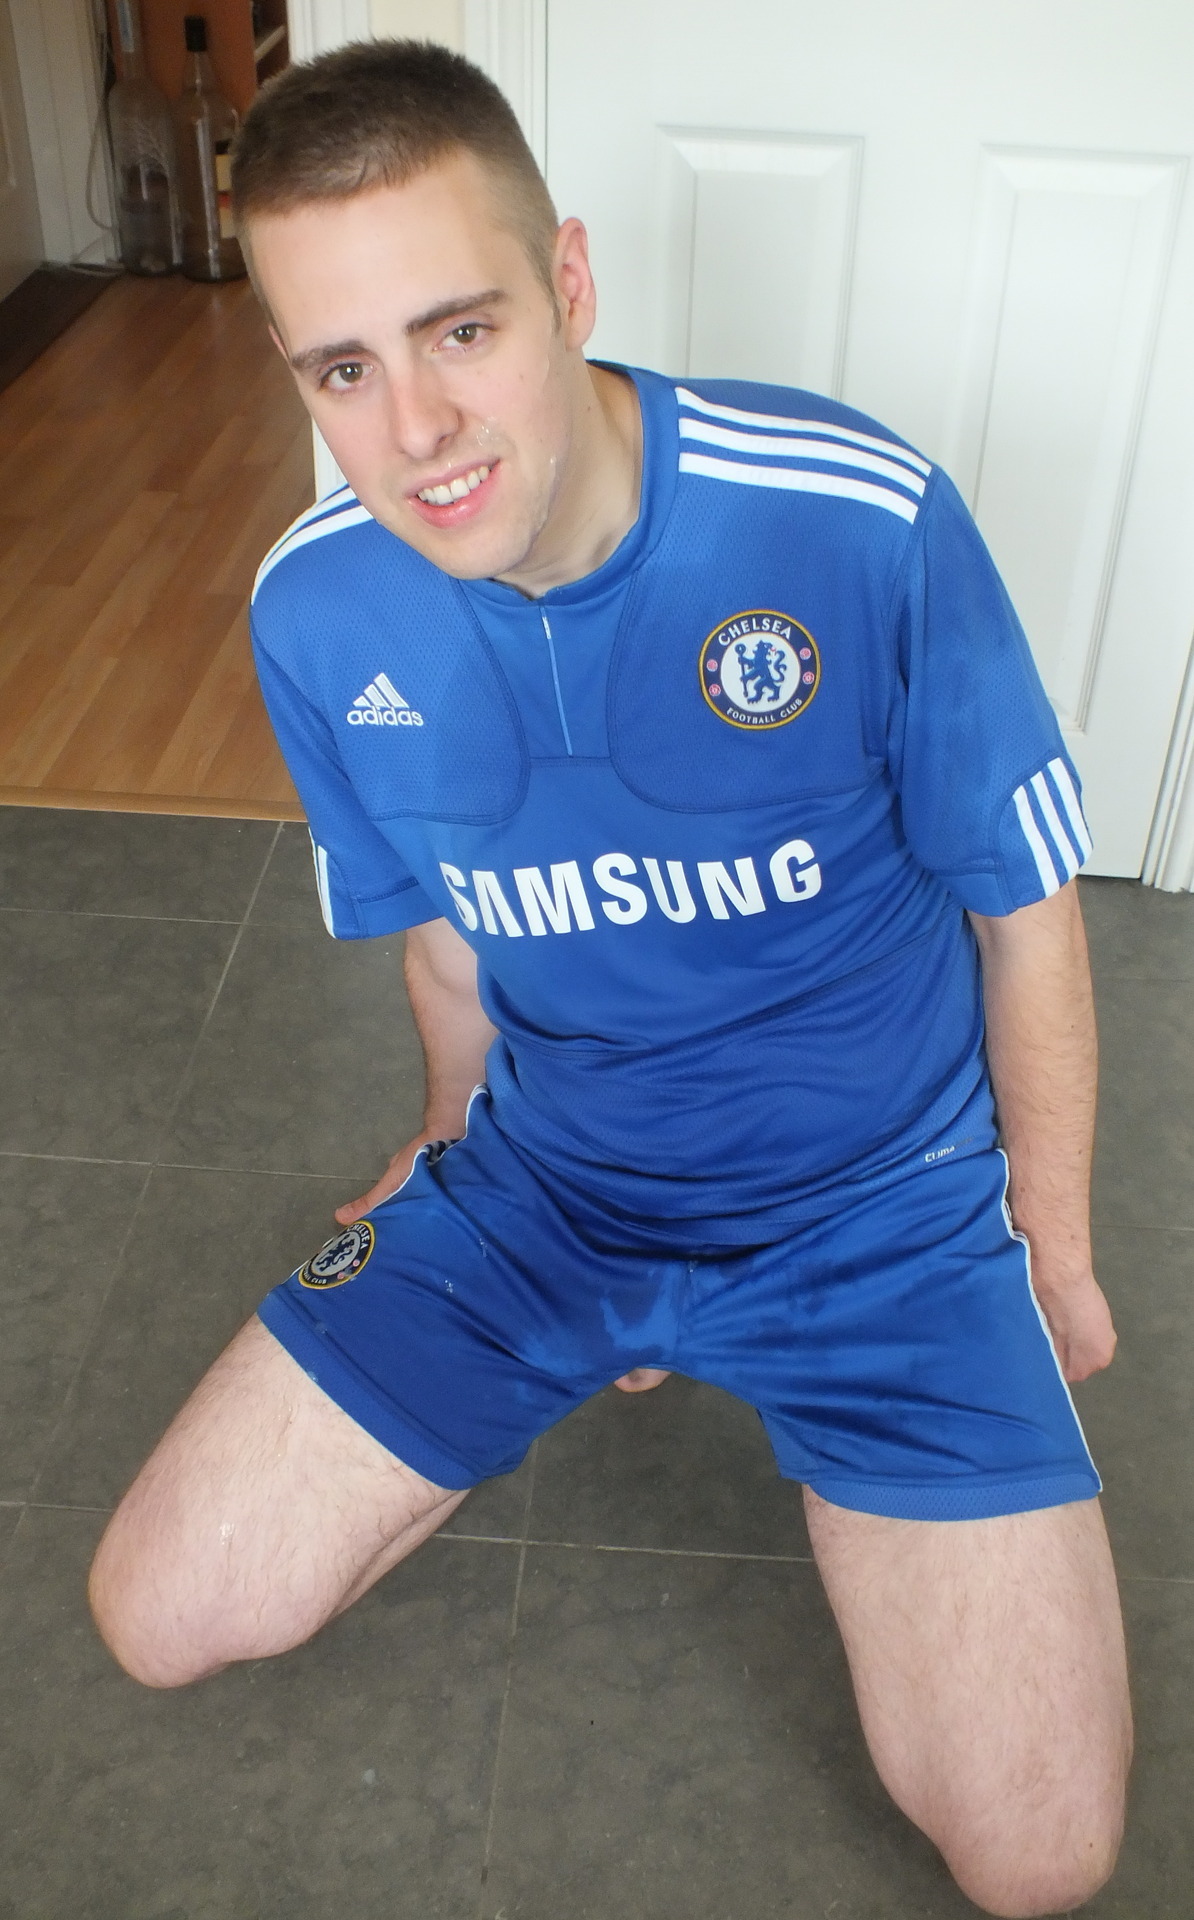 A Potential New Slave - Part 2 In Football Kit and Covered in My Piss and Spunk I want to hear from all my followers as to whether you find this slave horny and if so what do you want to see me do with it in the future.